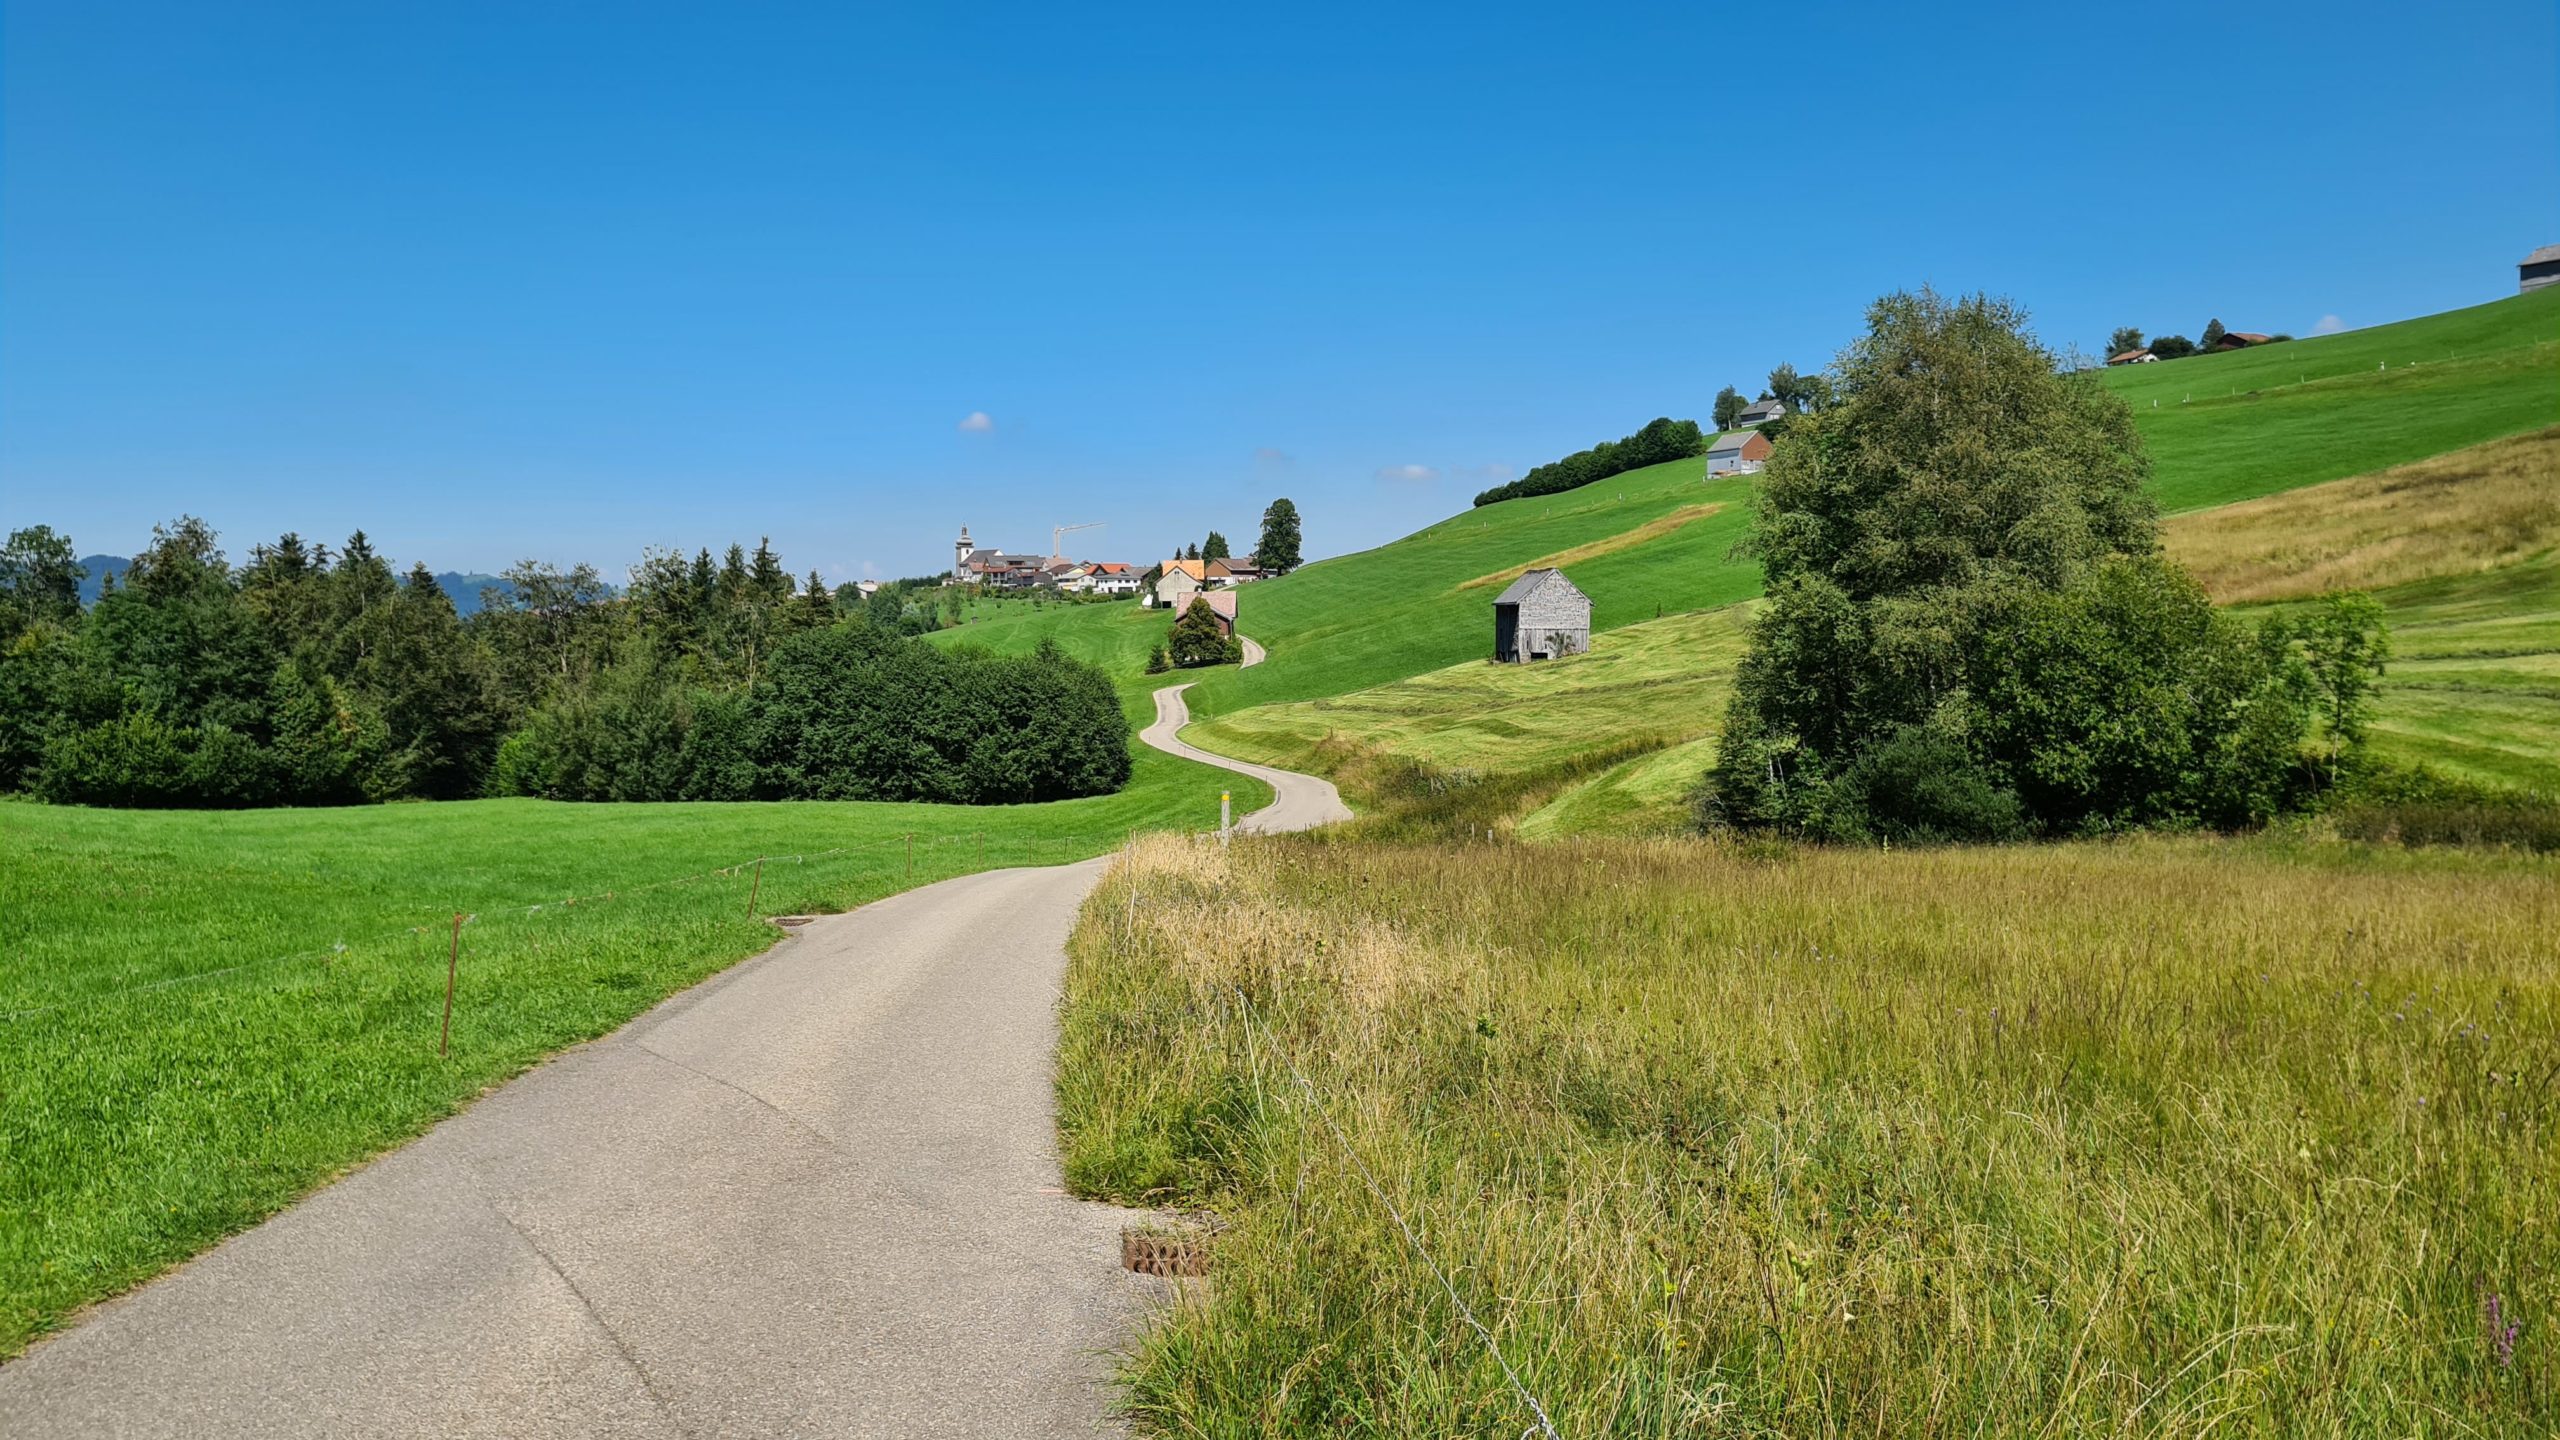 Path weaving through lush landscape with a village in the far distance and clear blue sky